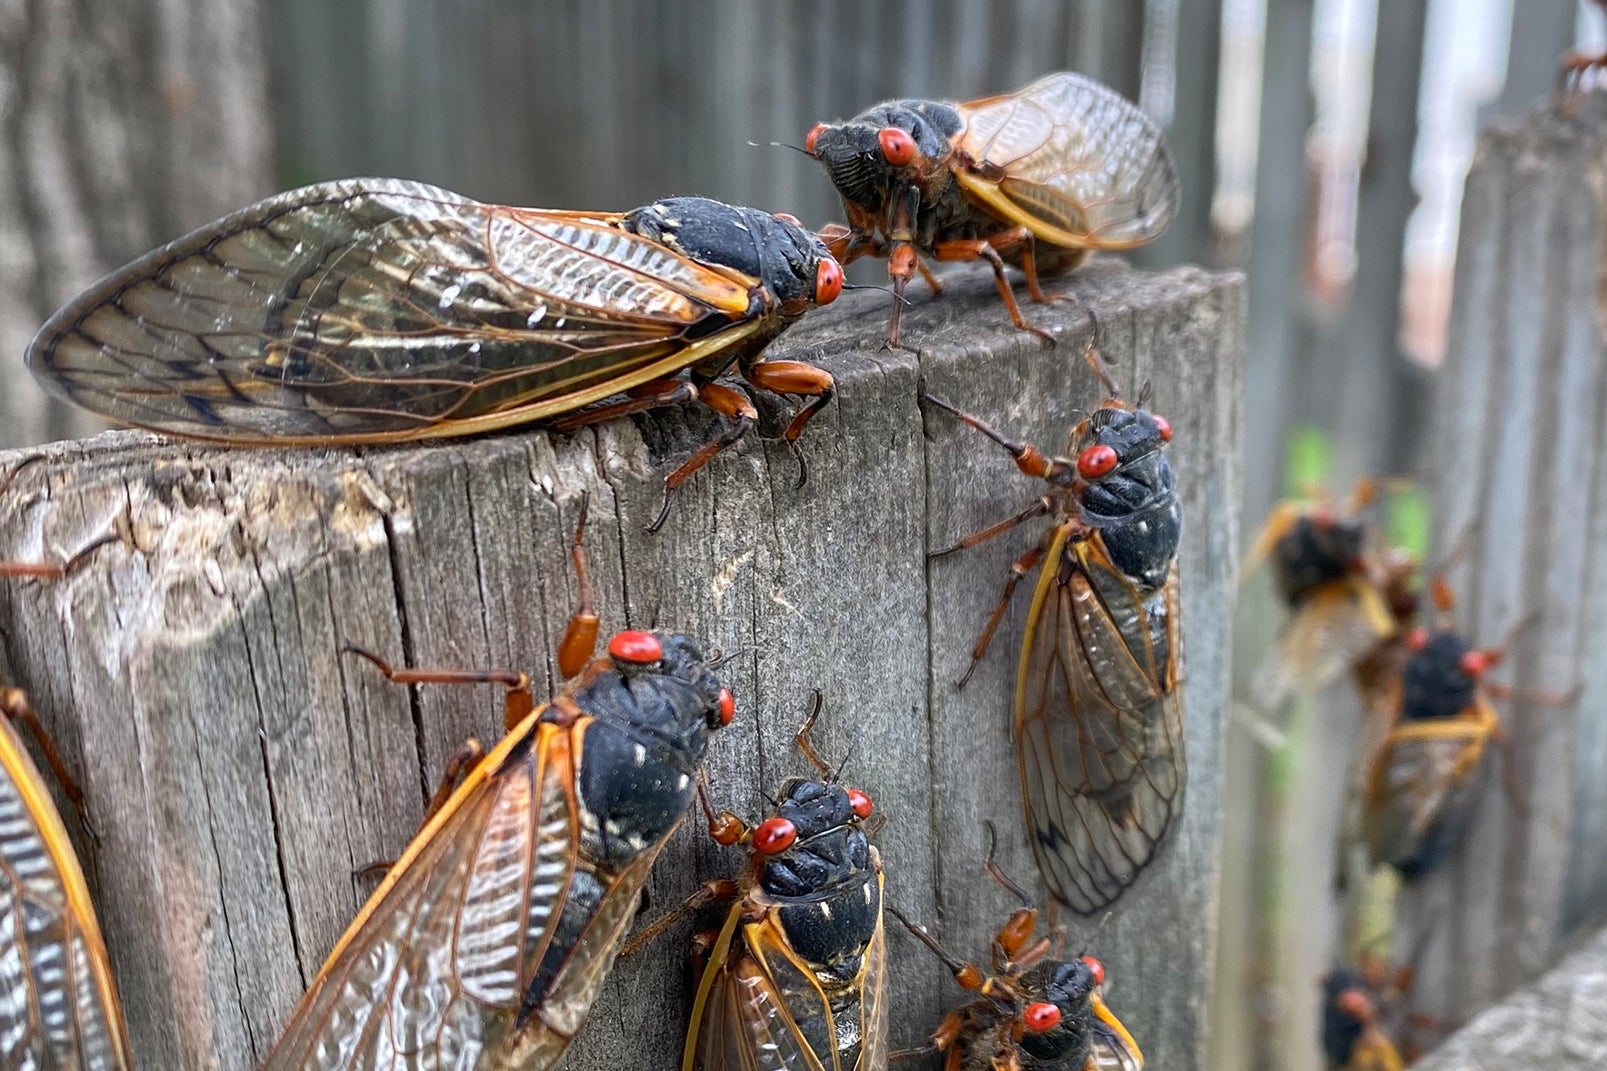 A whole lot of cicadas on a wooden fence.